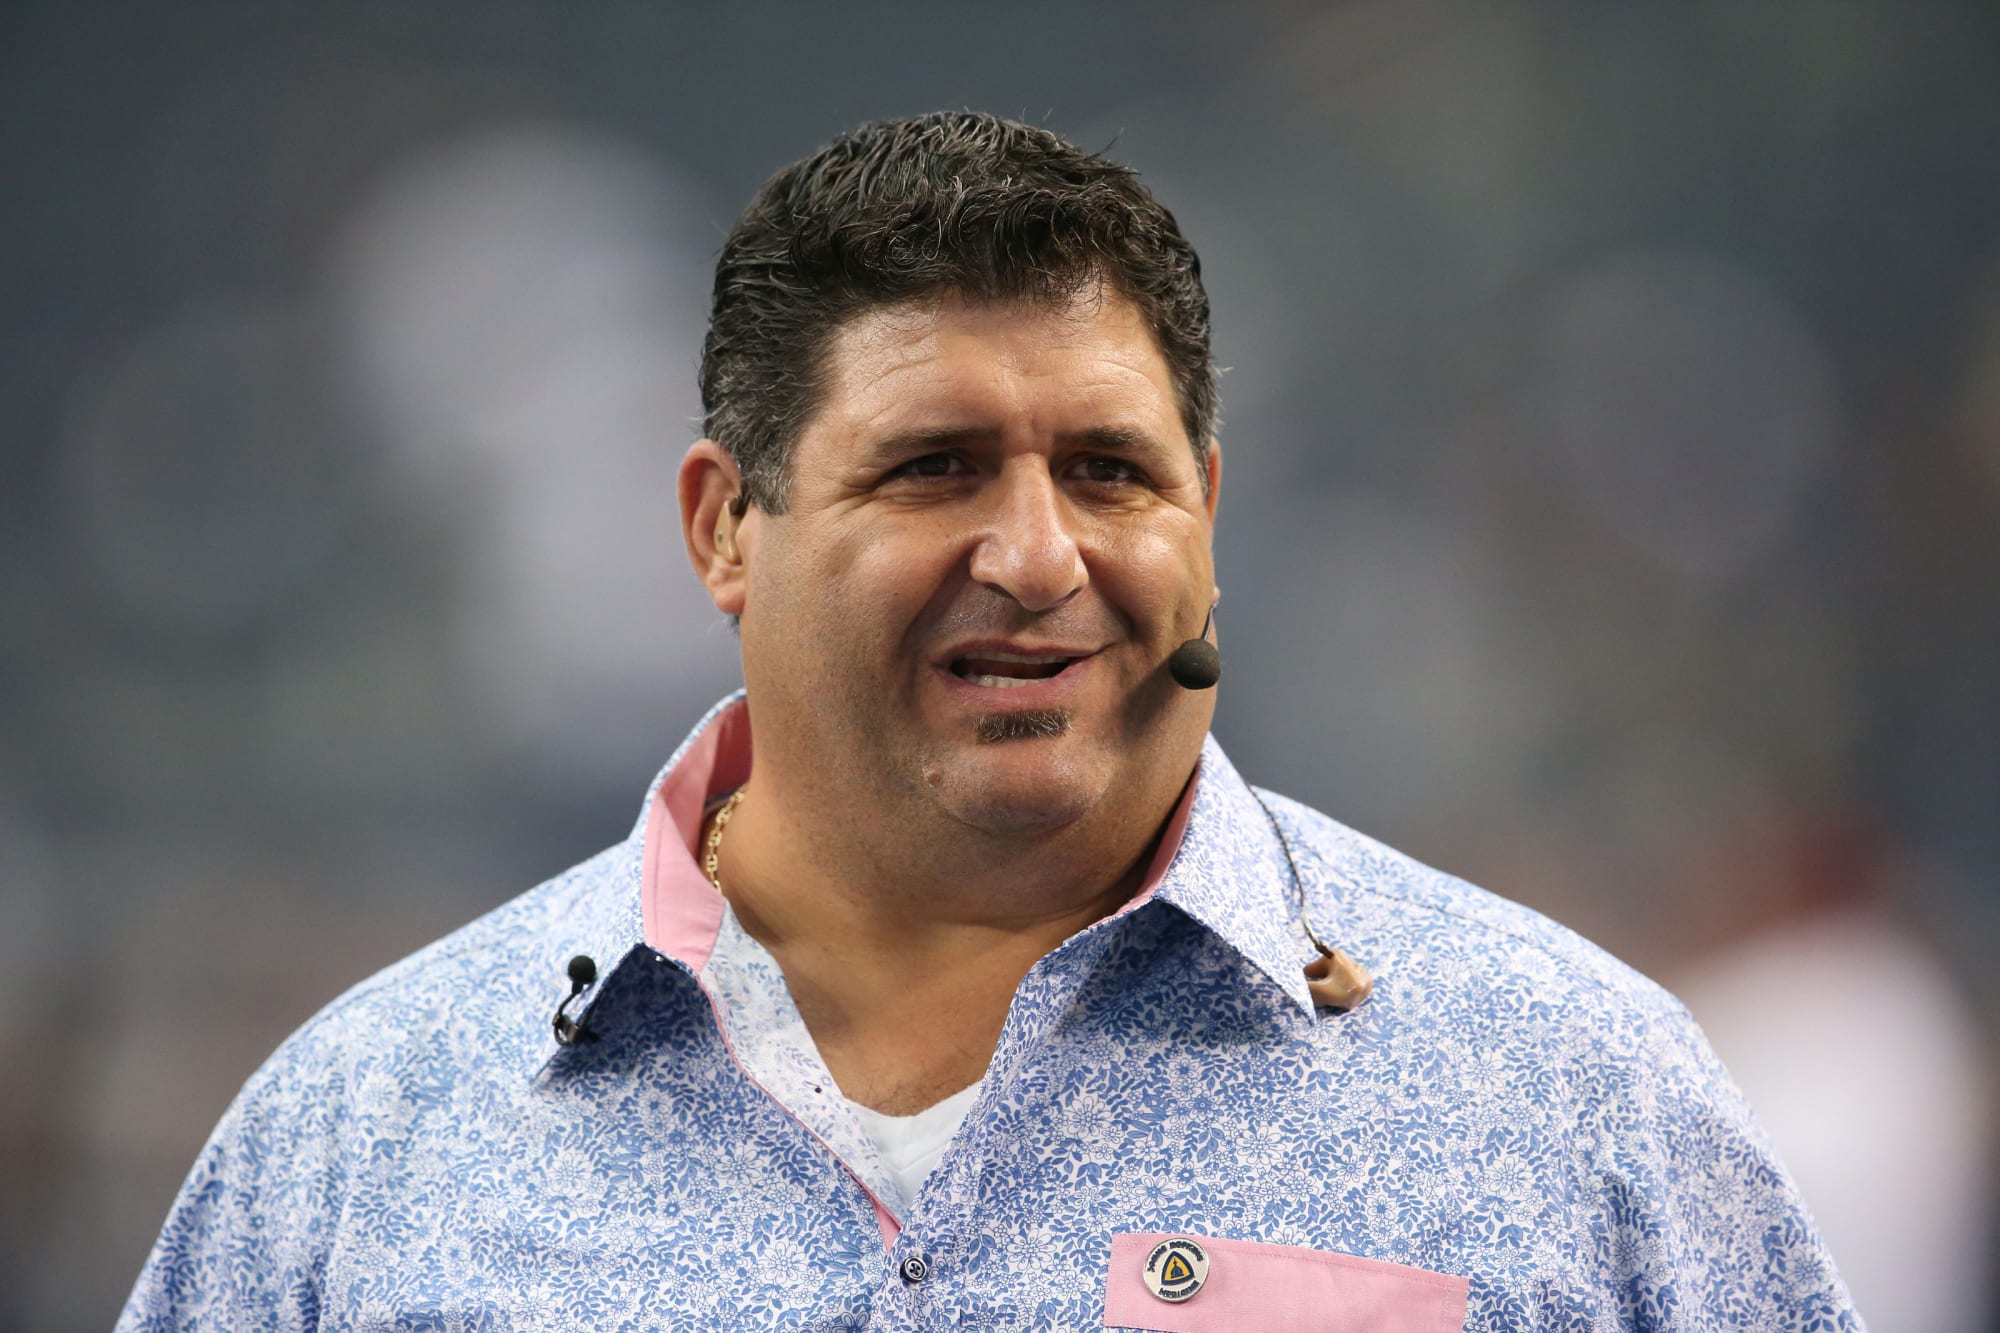 Ravens legends put out statement on Tony Siragusa’s passing thumbnail